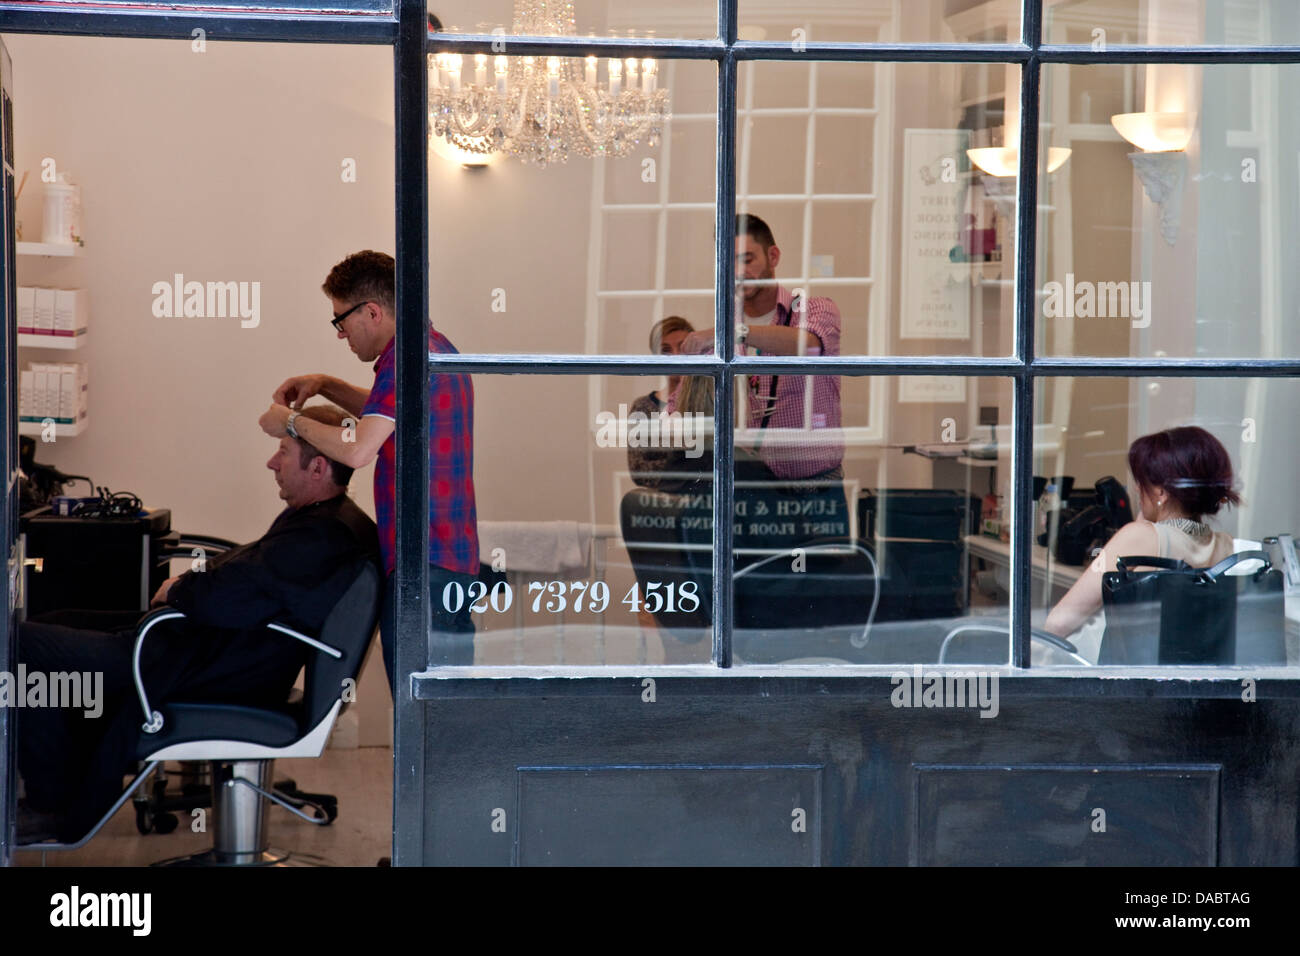 Hairdressers Shop, Covent Garden, London, England Stock Photo